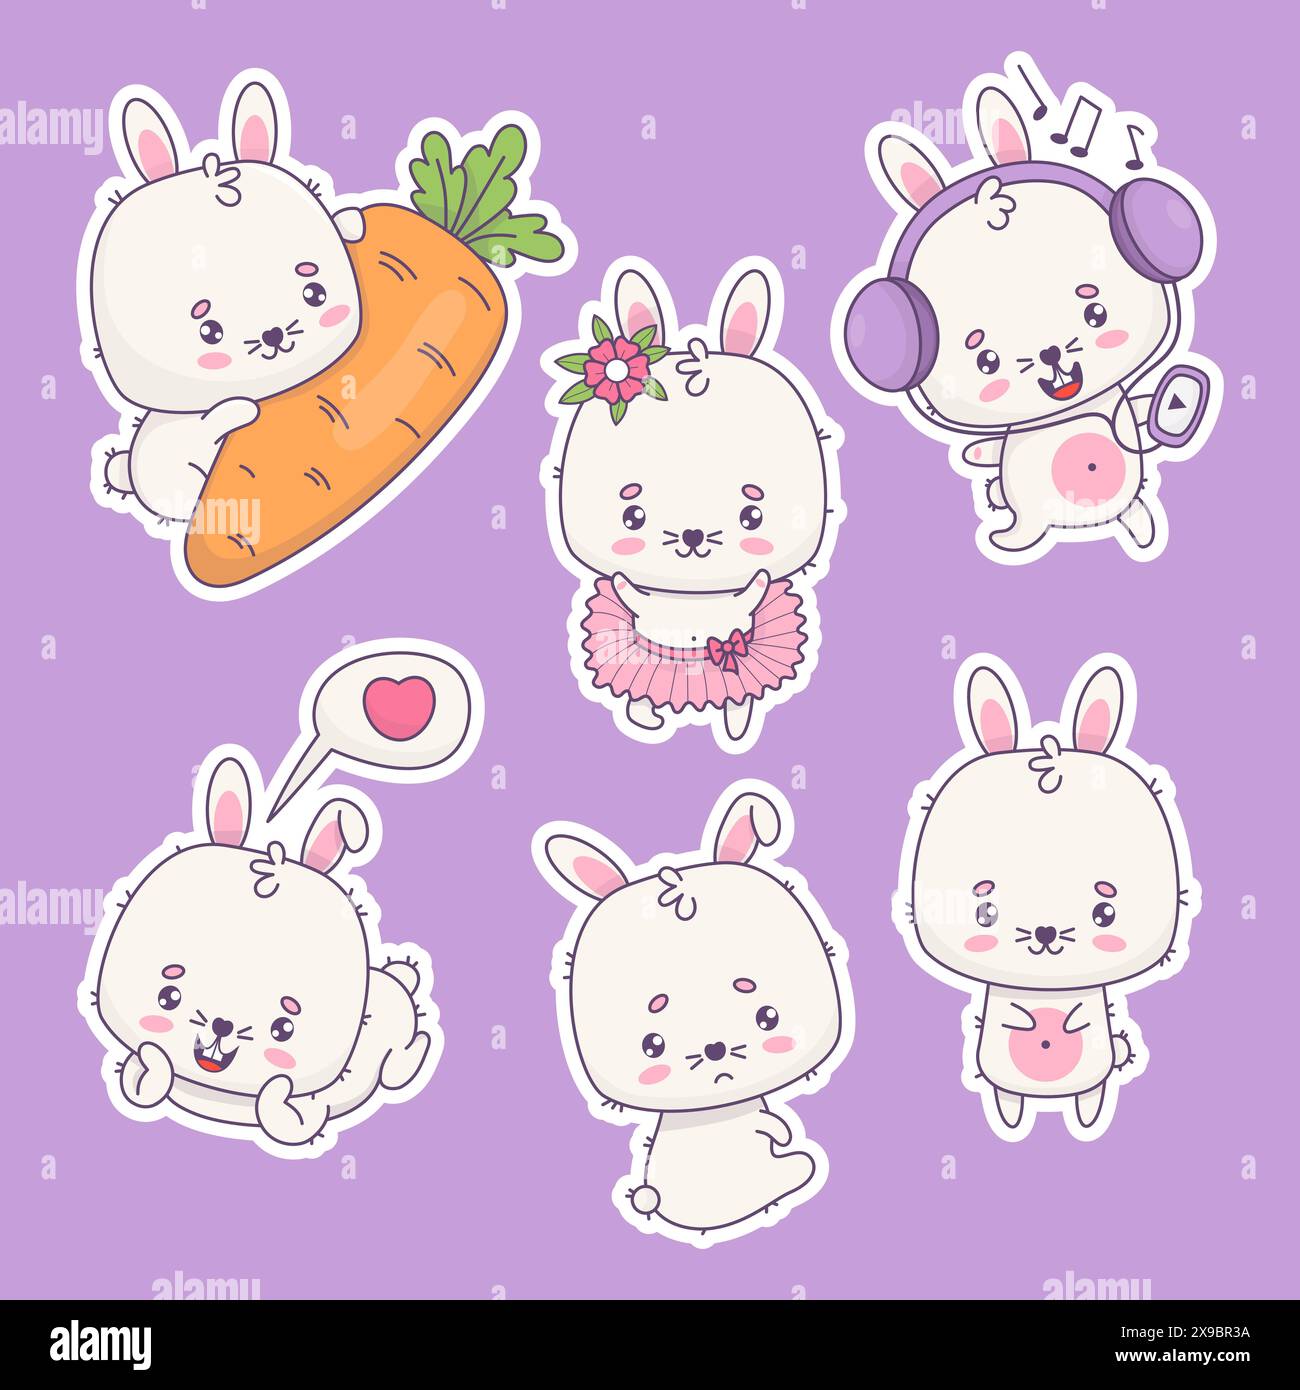 Collection cute white rabbit stickers. Ballerina girl, bunny in love, with carrot and headphones, unhappy sad baby. Isolated funny kawaii animal chara Stock Vector